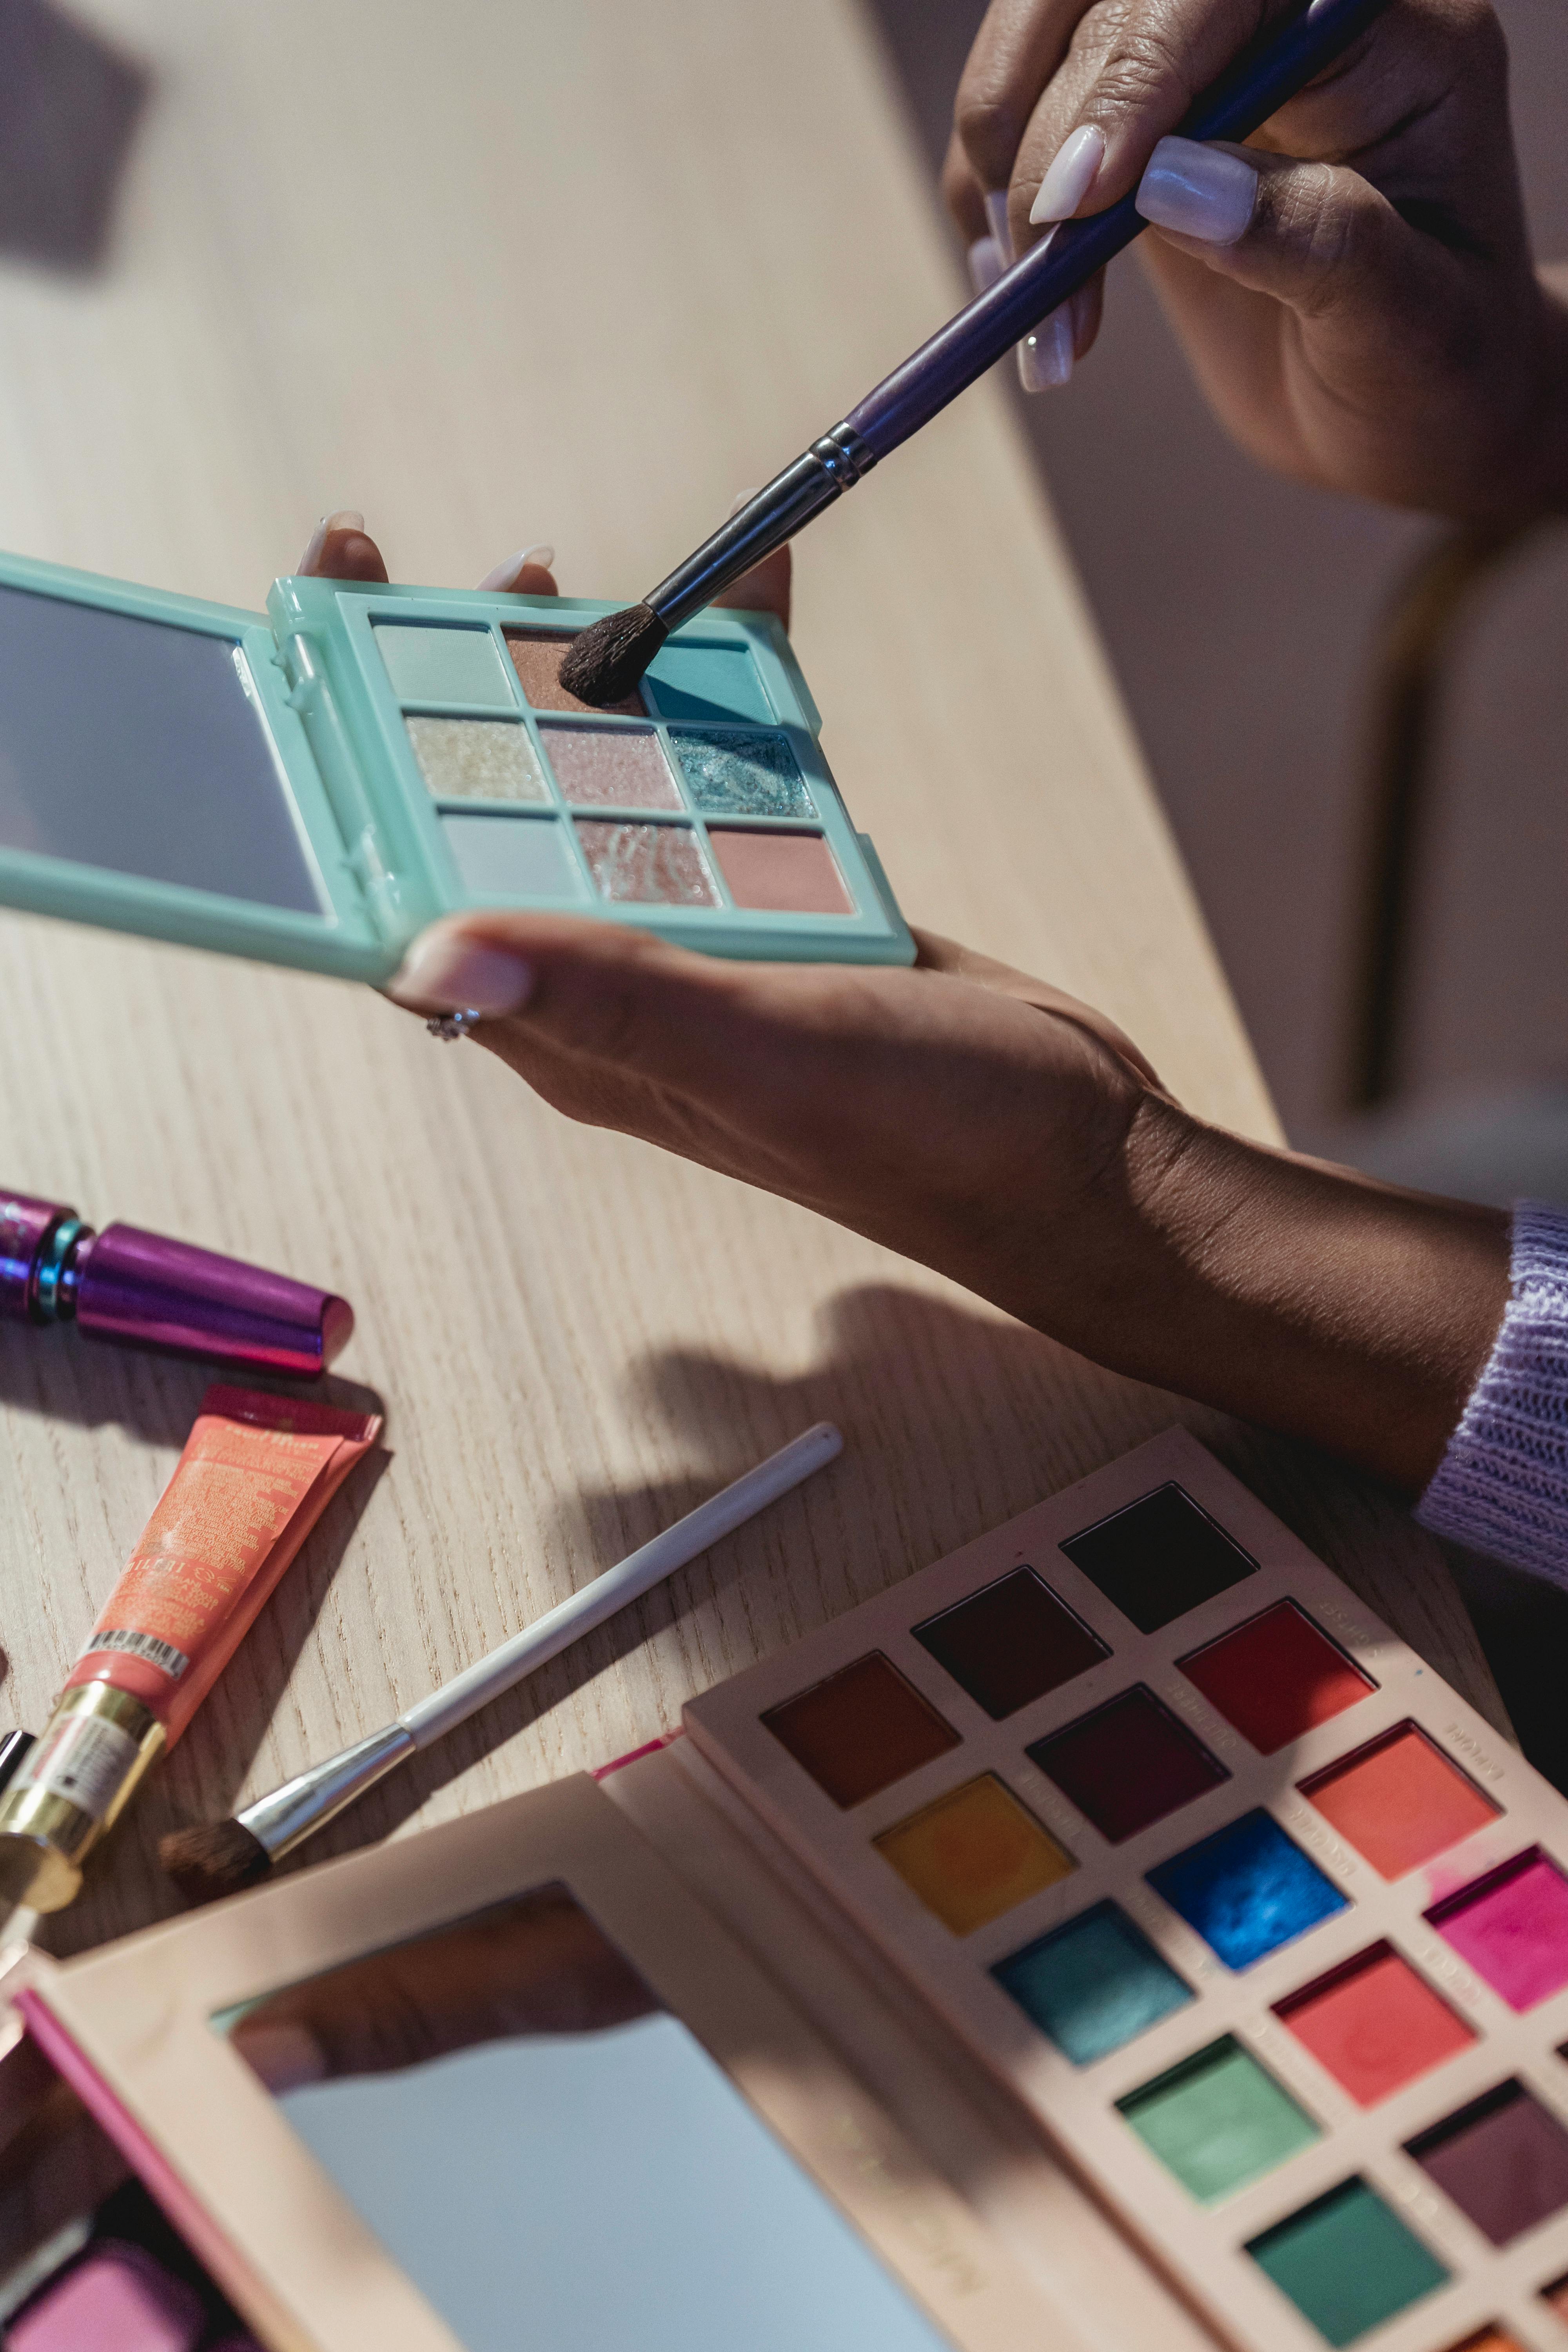 For illustration purposes only. Makeup artist selects the product she wants to use | Source: Pexels